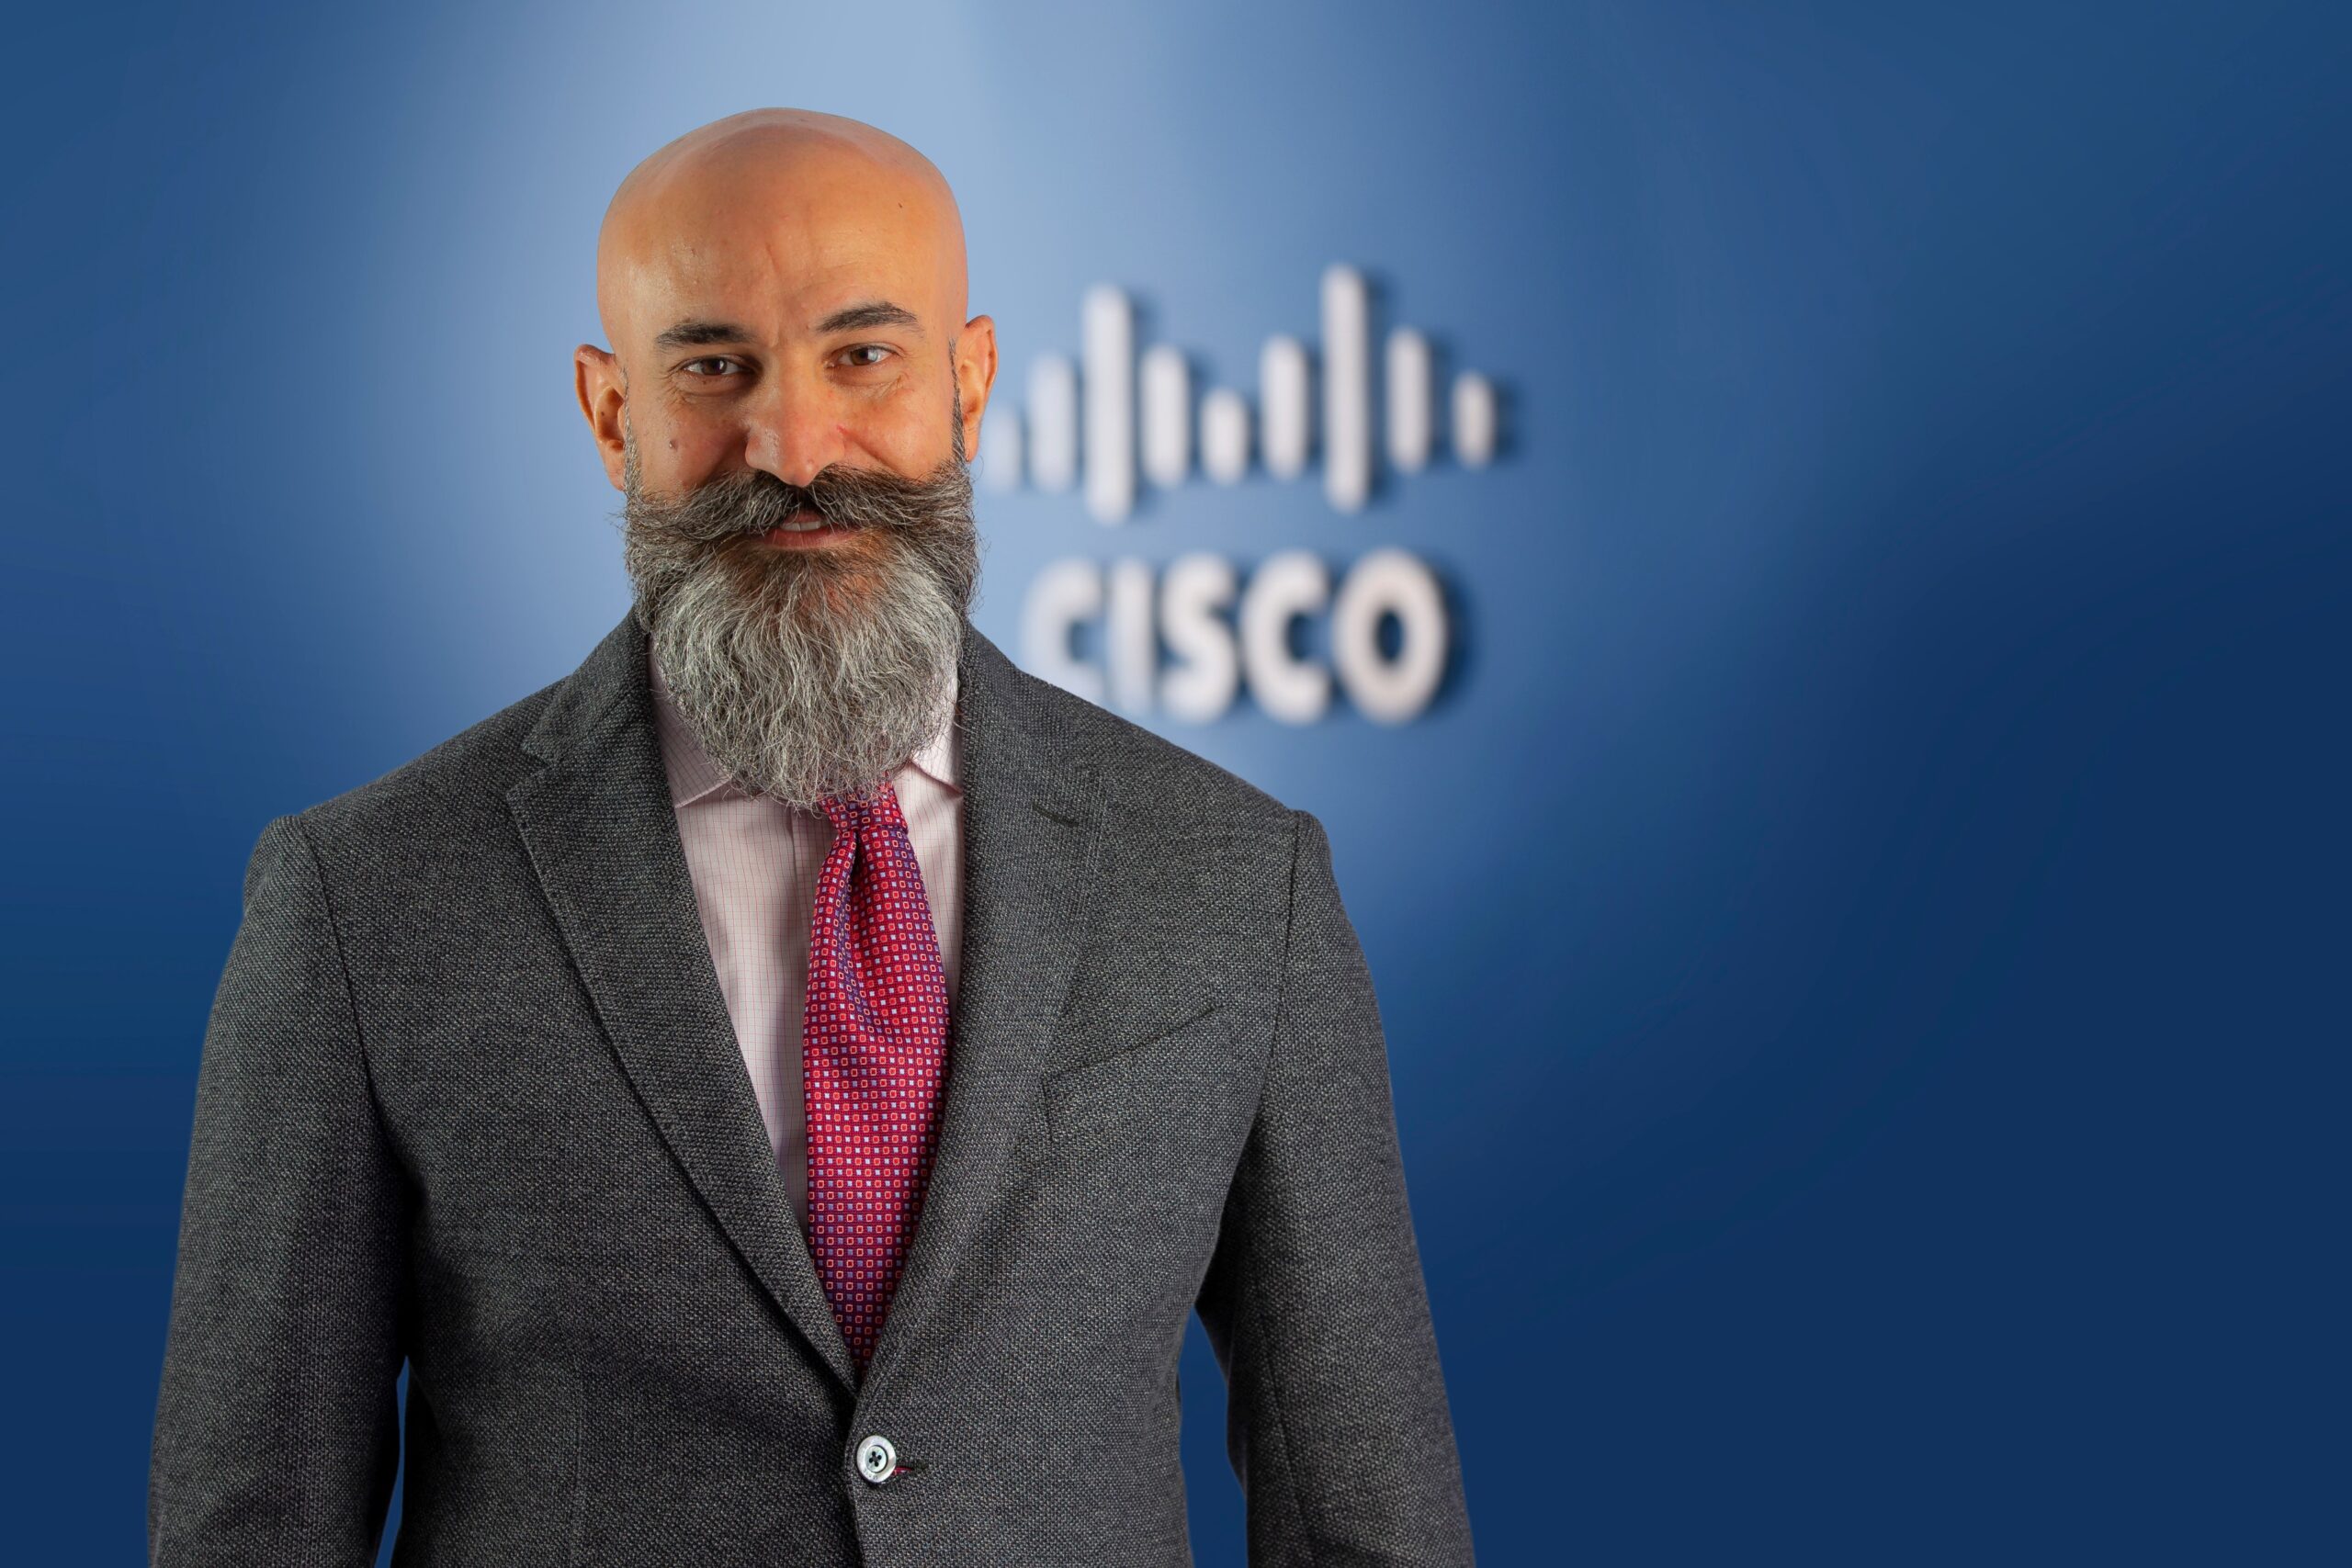 Cisco appointed to manage and maintain Expo 2020 Dubai’s IT network